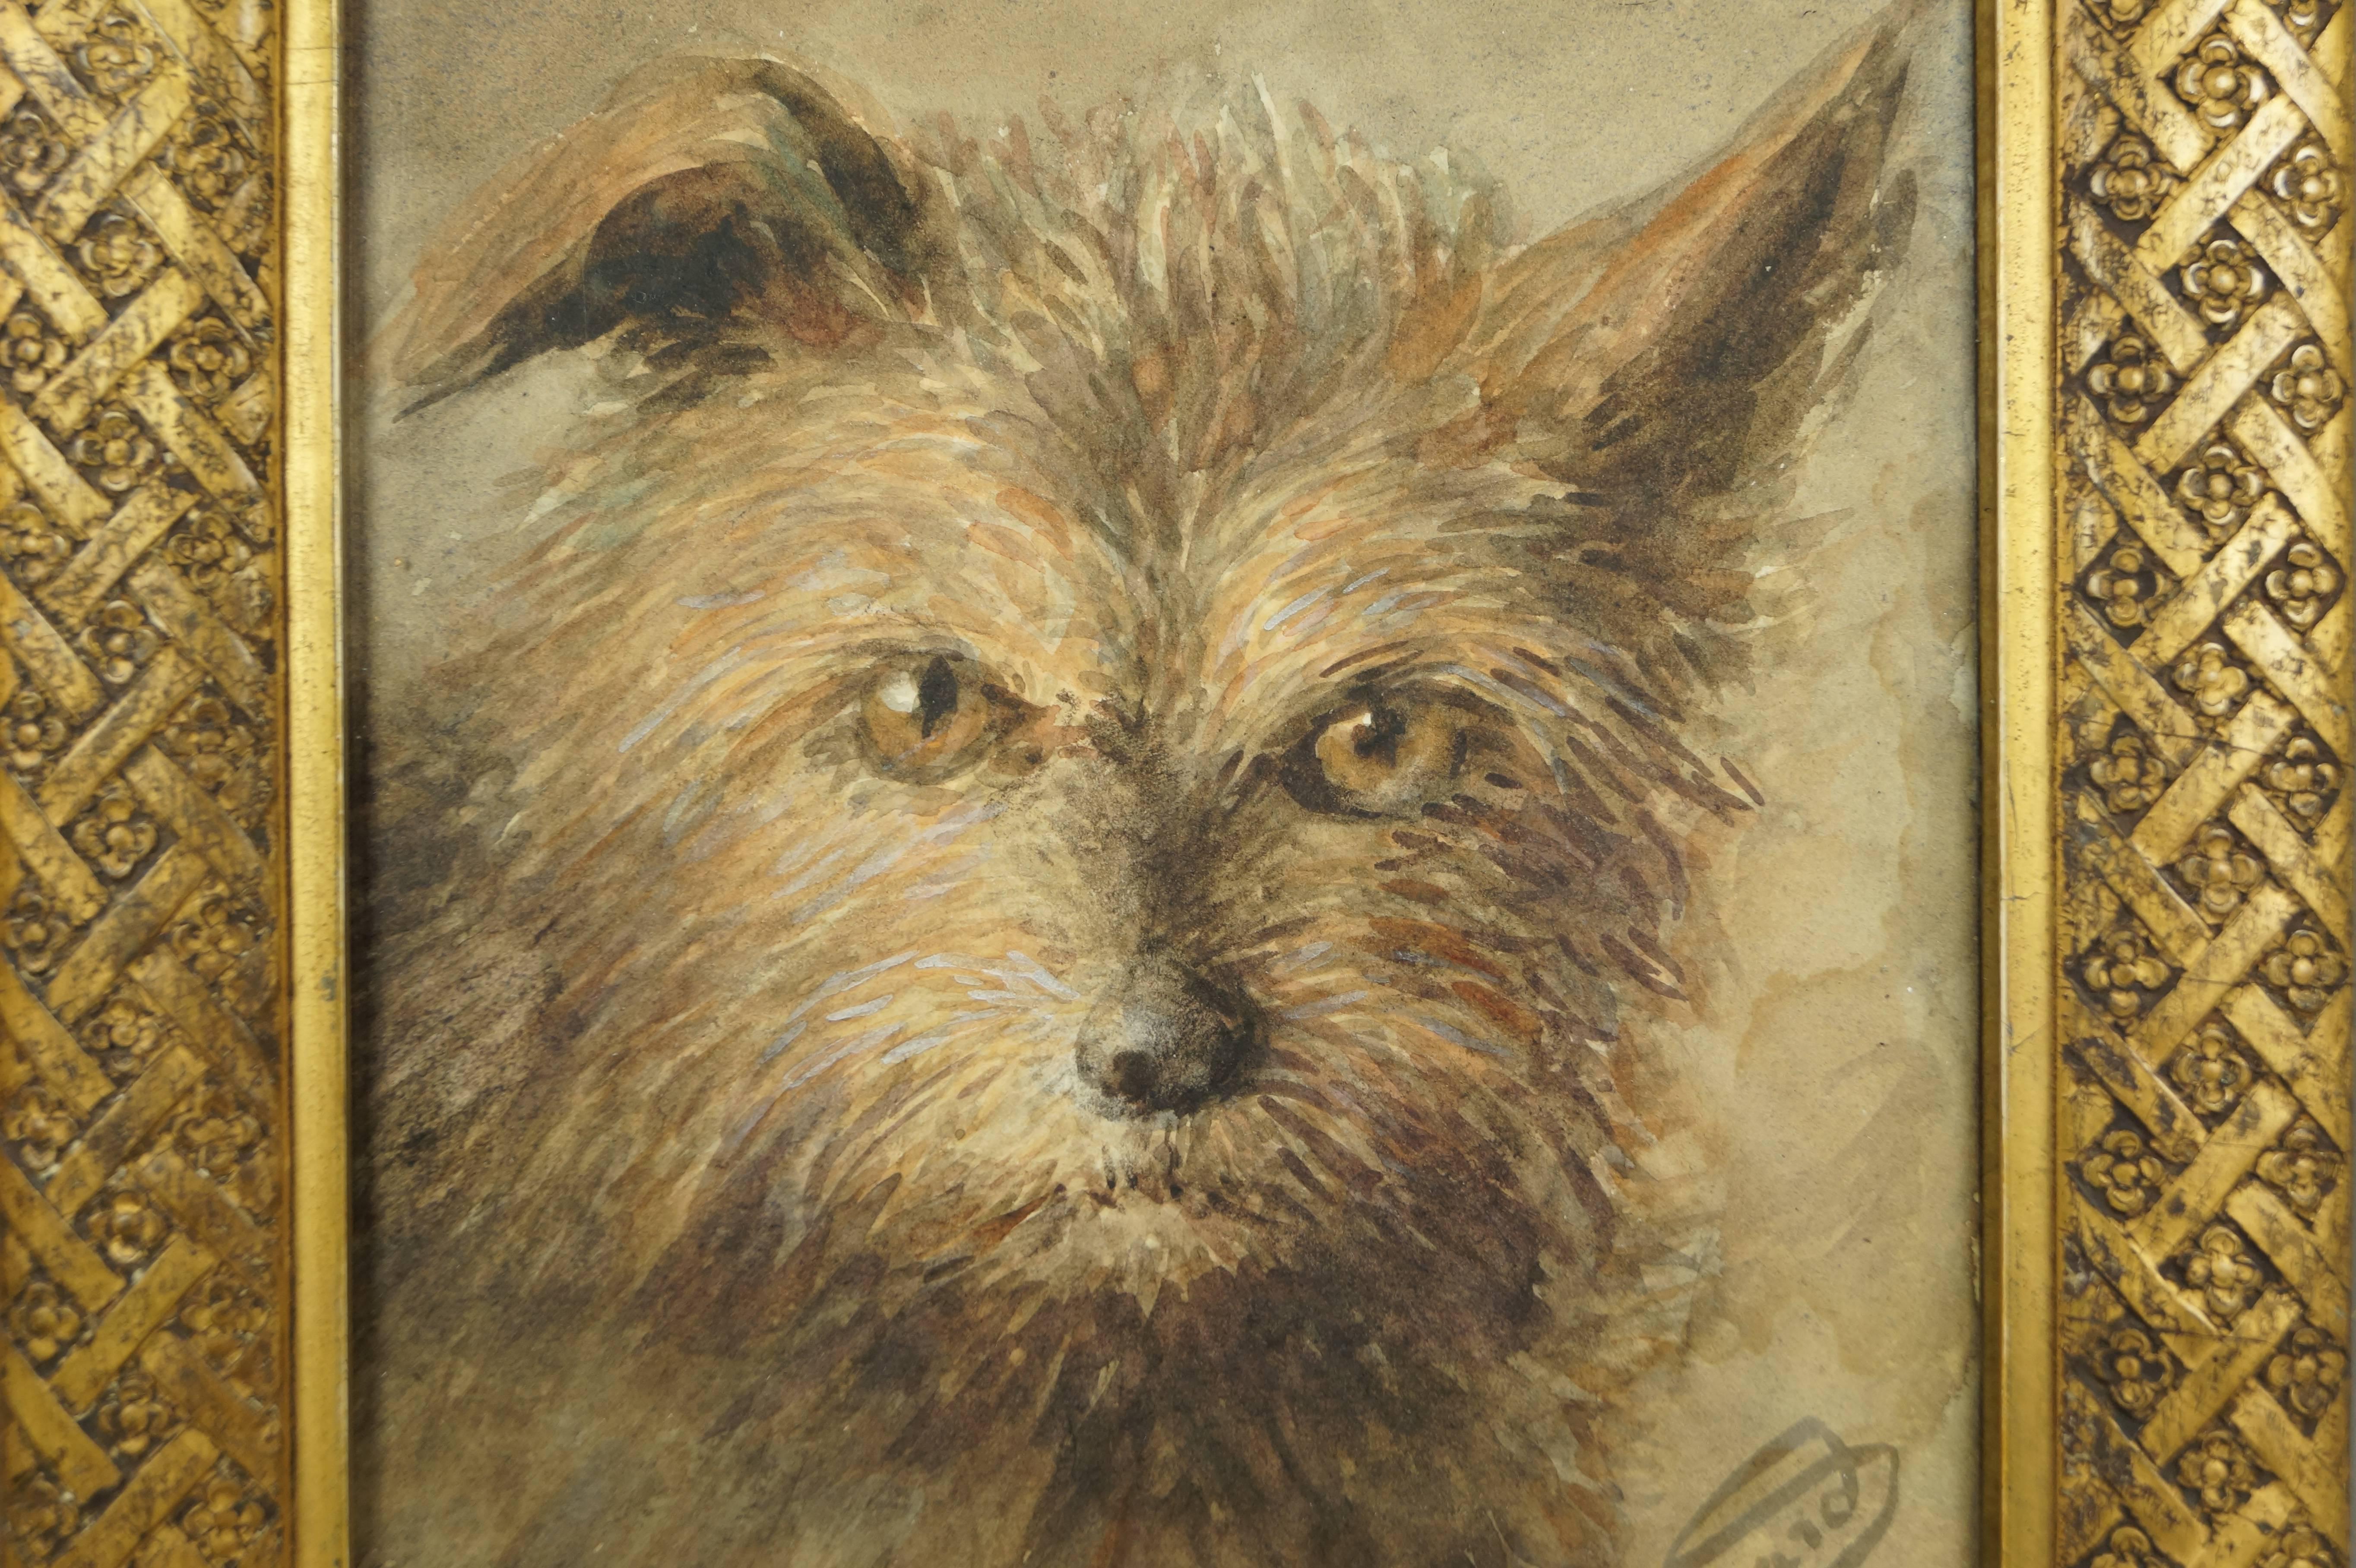 This wonderful early depiction of a Norwich Terrier is by the sought after British artist Emily Lawton Barnard, nee Cummins (active 1881 – 1911). Emily Barnard was an artist, author and an illustrator who worked in London. She wrote and illustrated